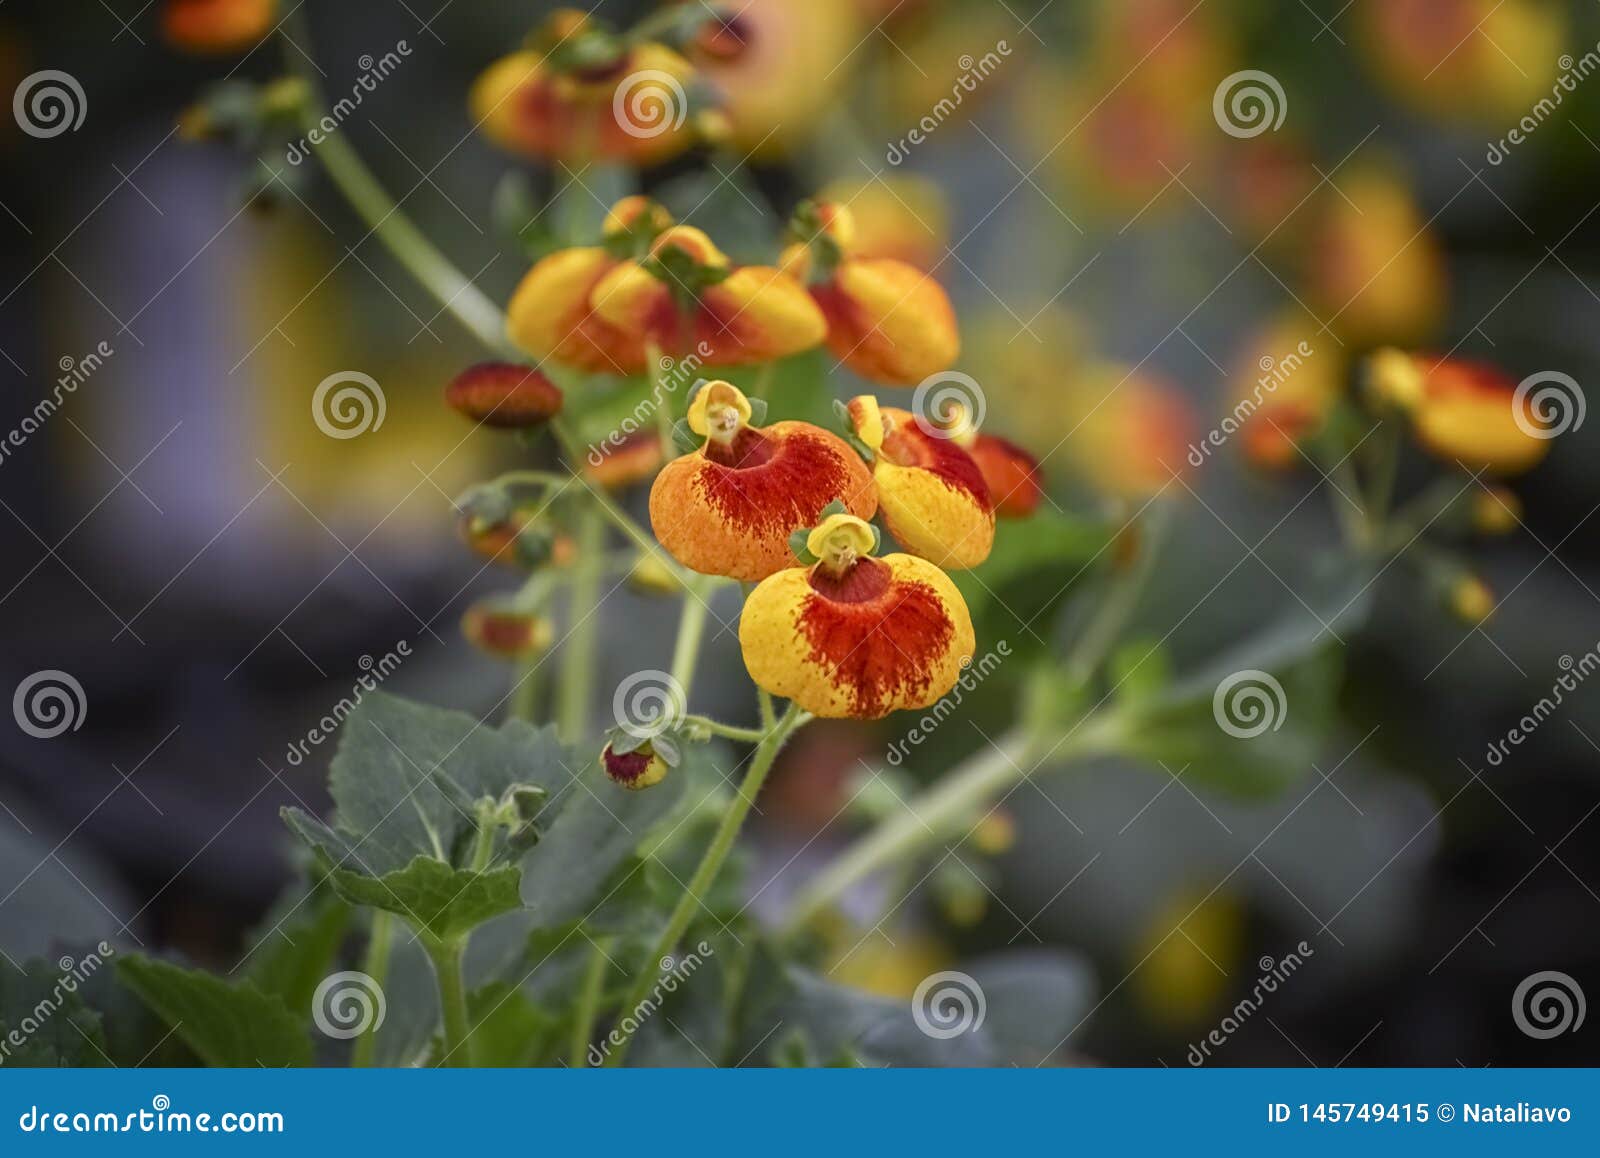 Growing Pocketbook Plants: Caring For The Gorgeous Calceolaria Flower  display